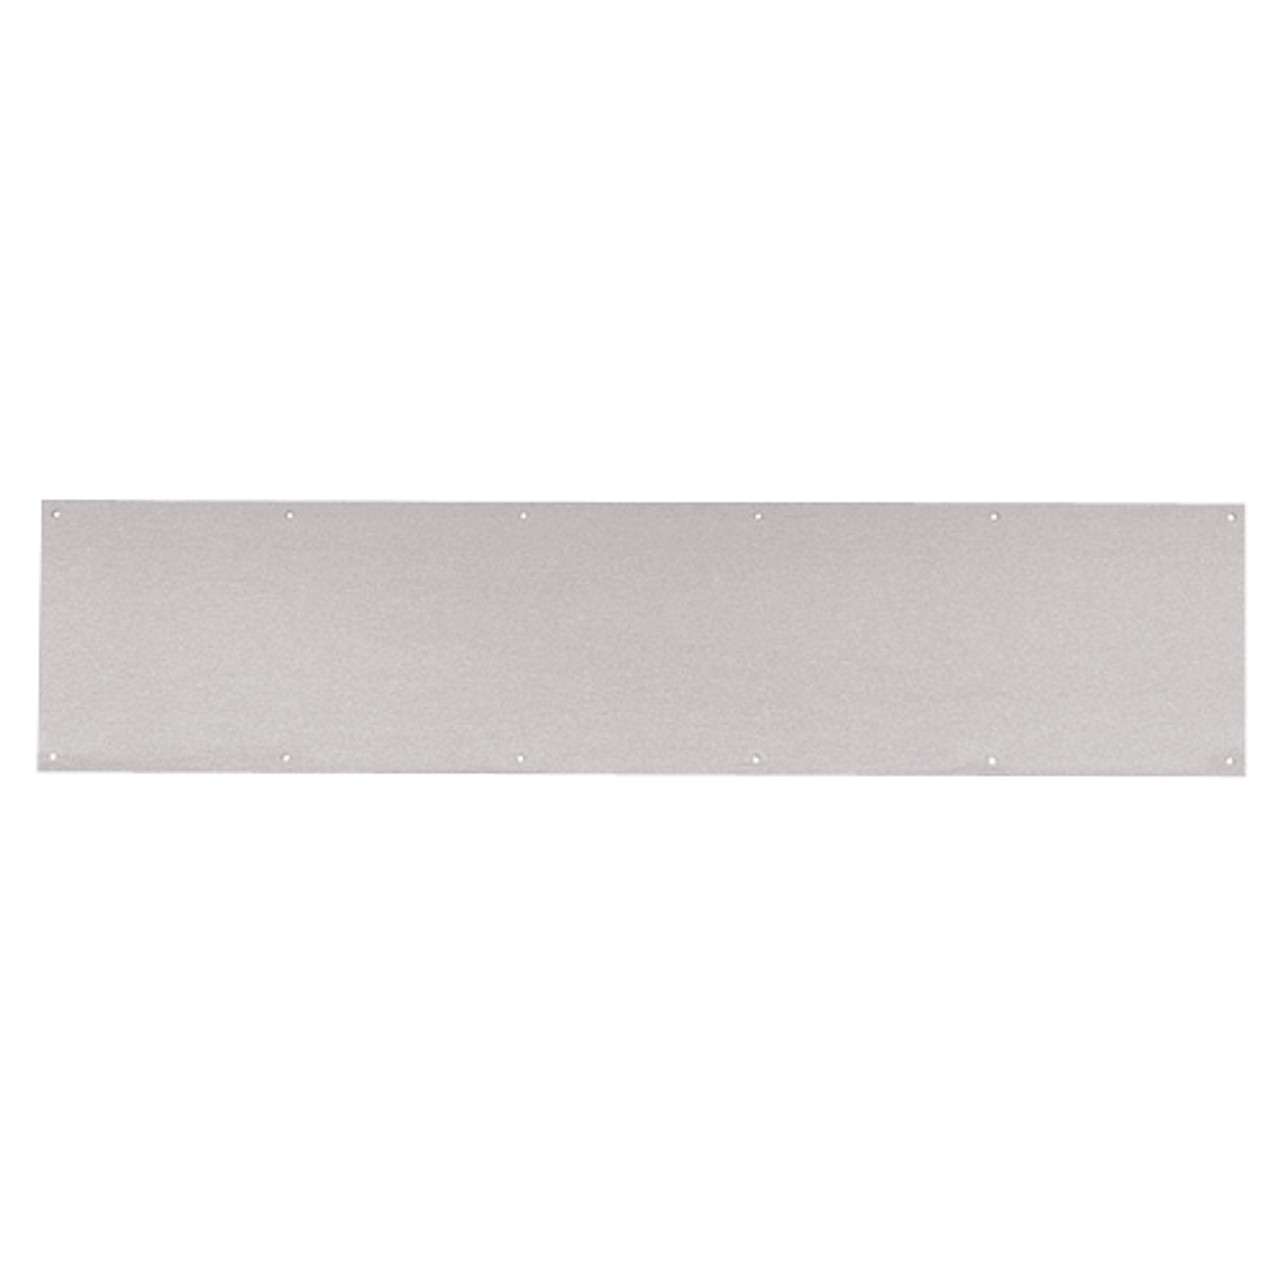 8400-US32D-34x46-B-CS Ives 8400 Series Protection Plate in Satin Stainless Steel